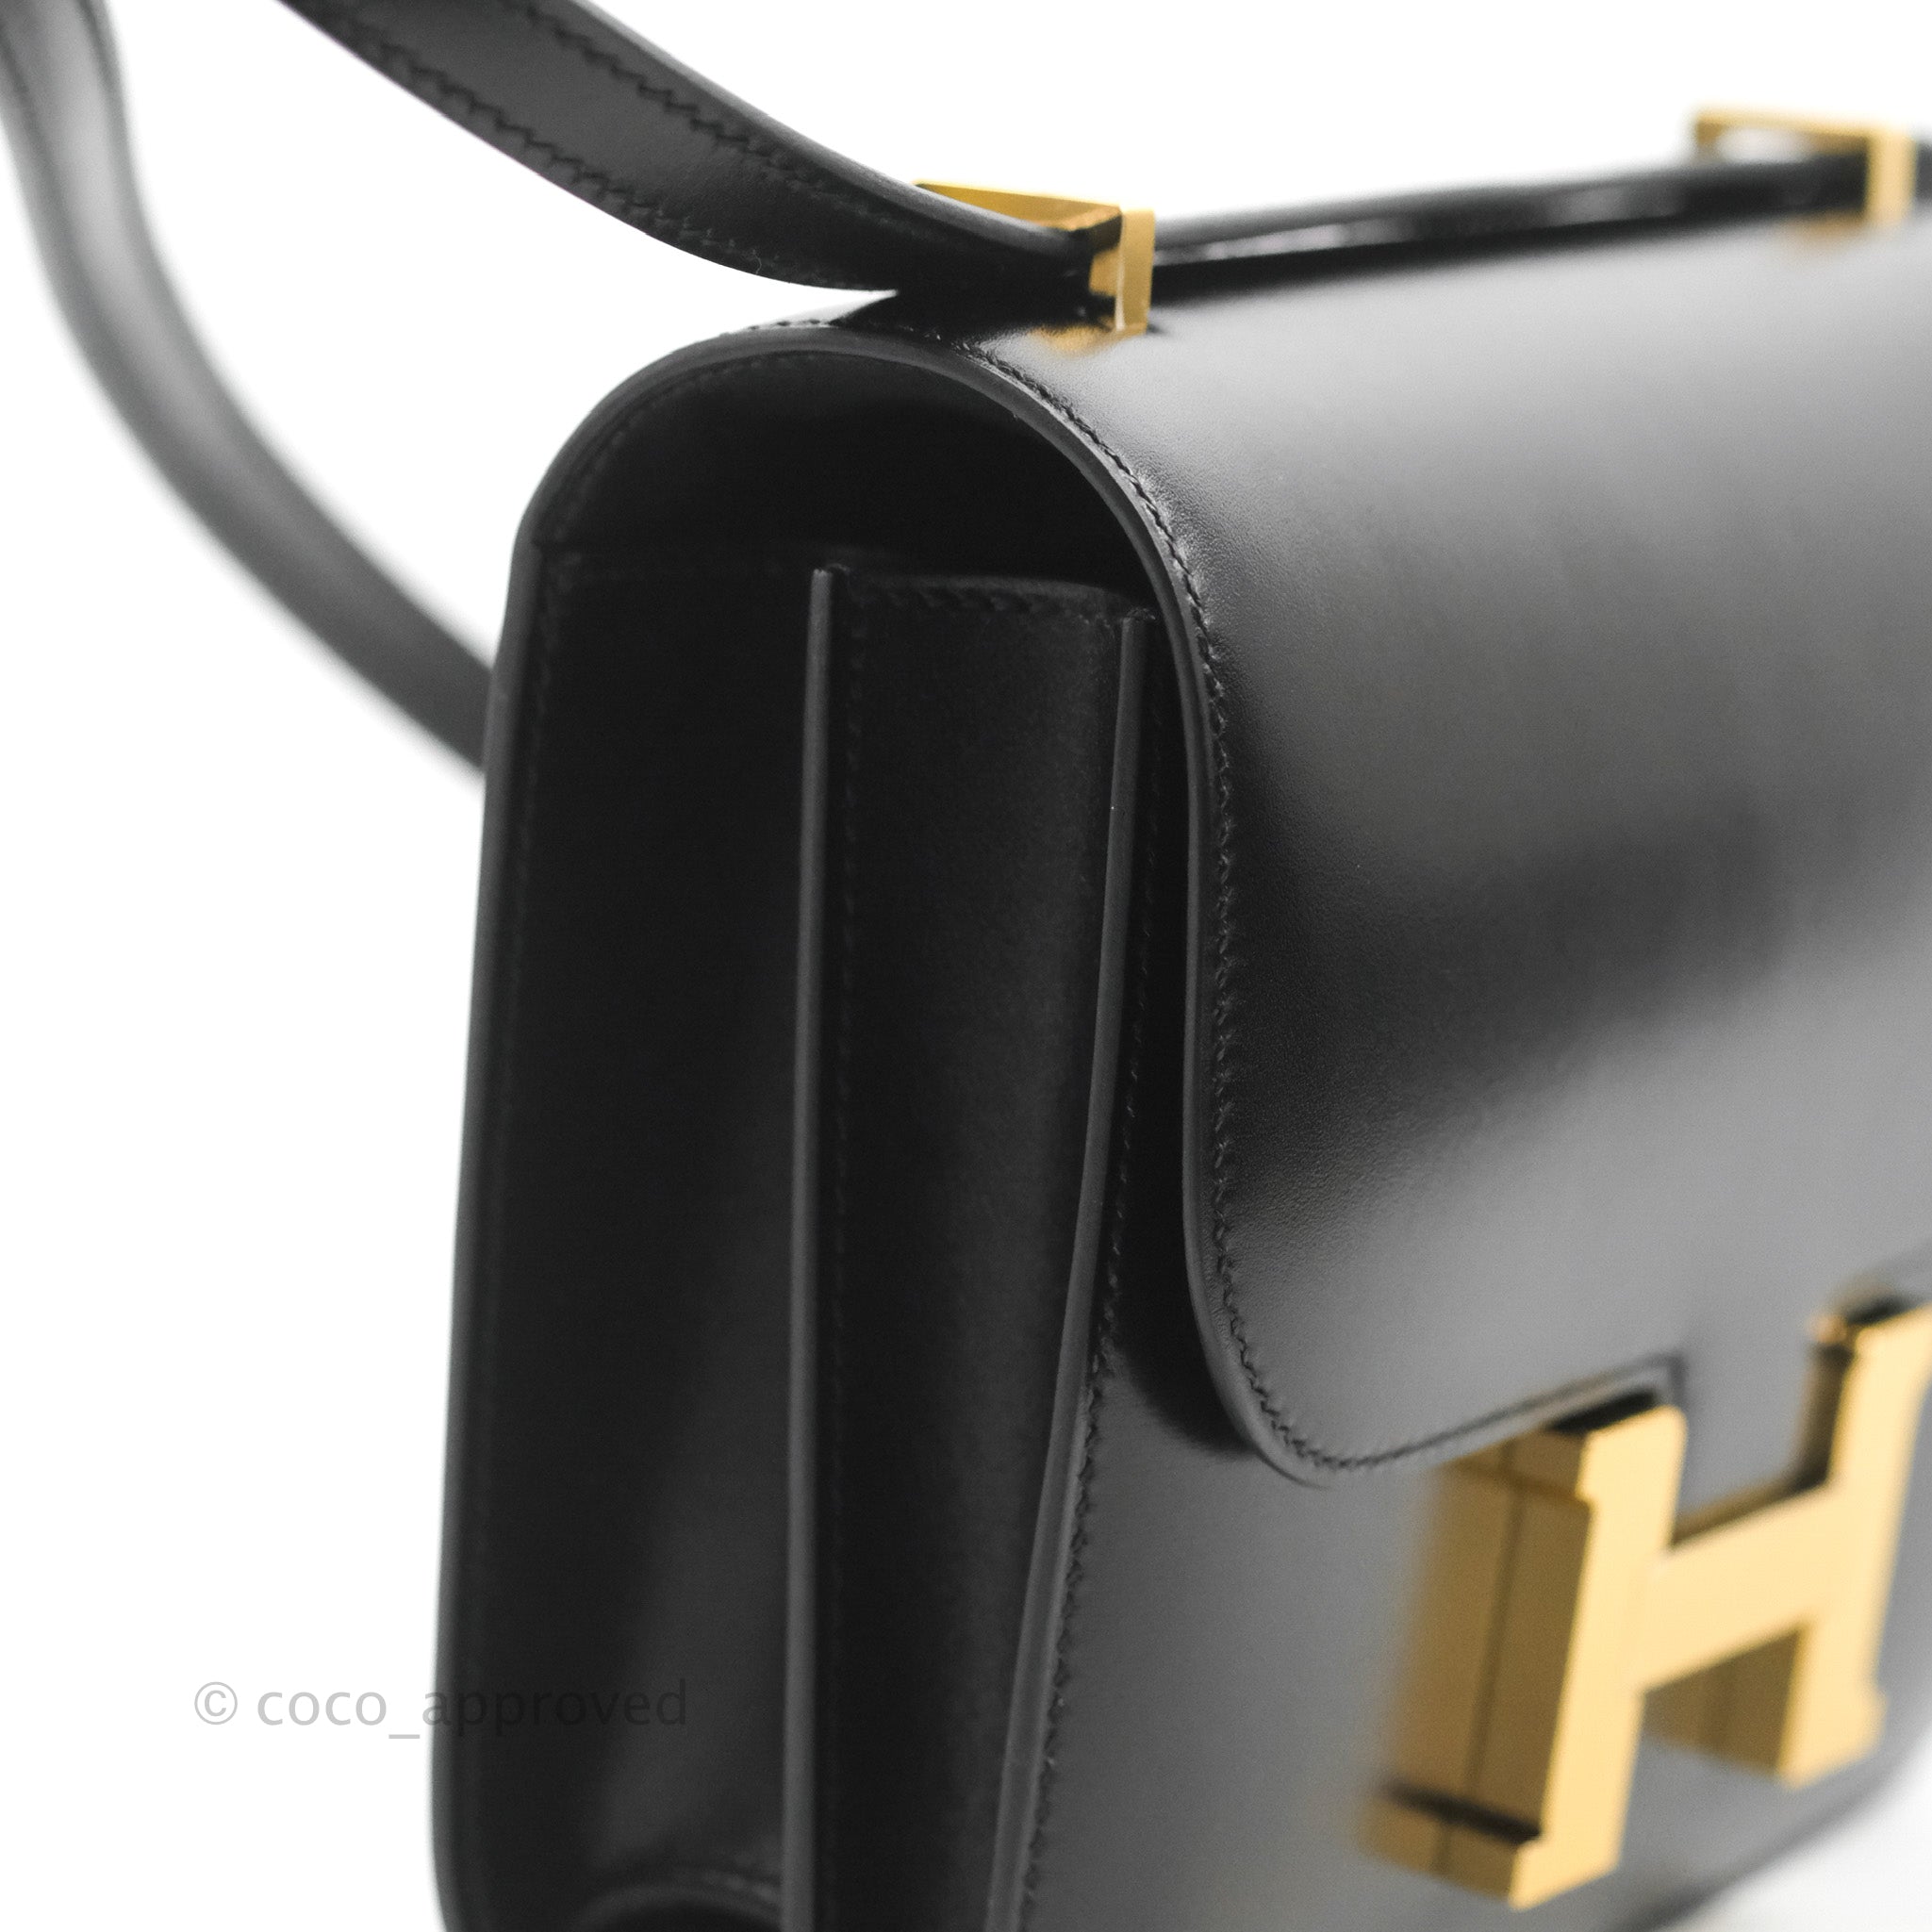 A BLACK CALF BOX LEATHER MINI CONSTANCE 18 WITH GOLD HARDWARE